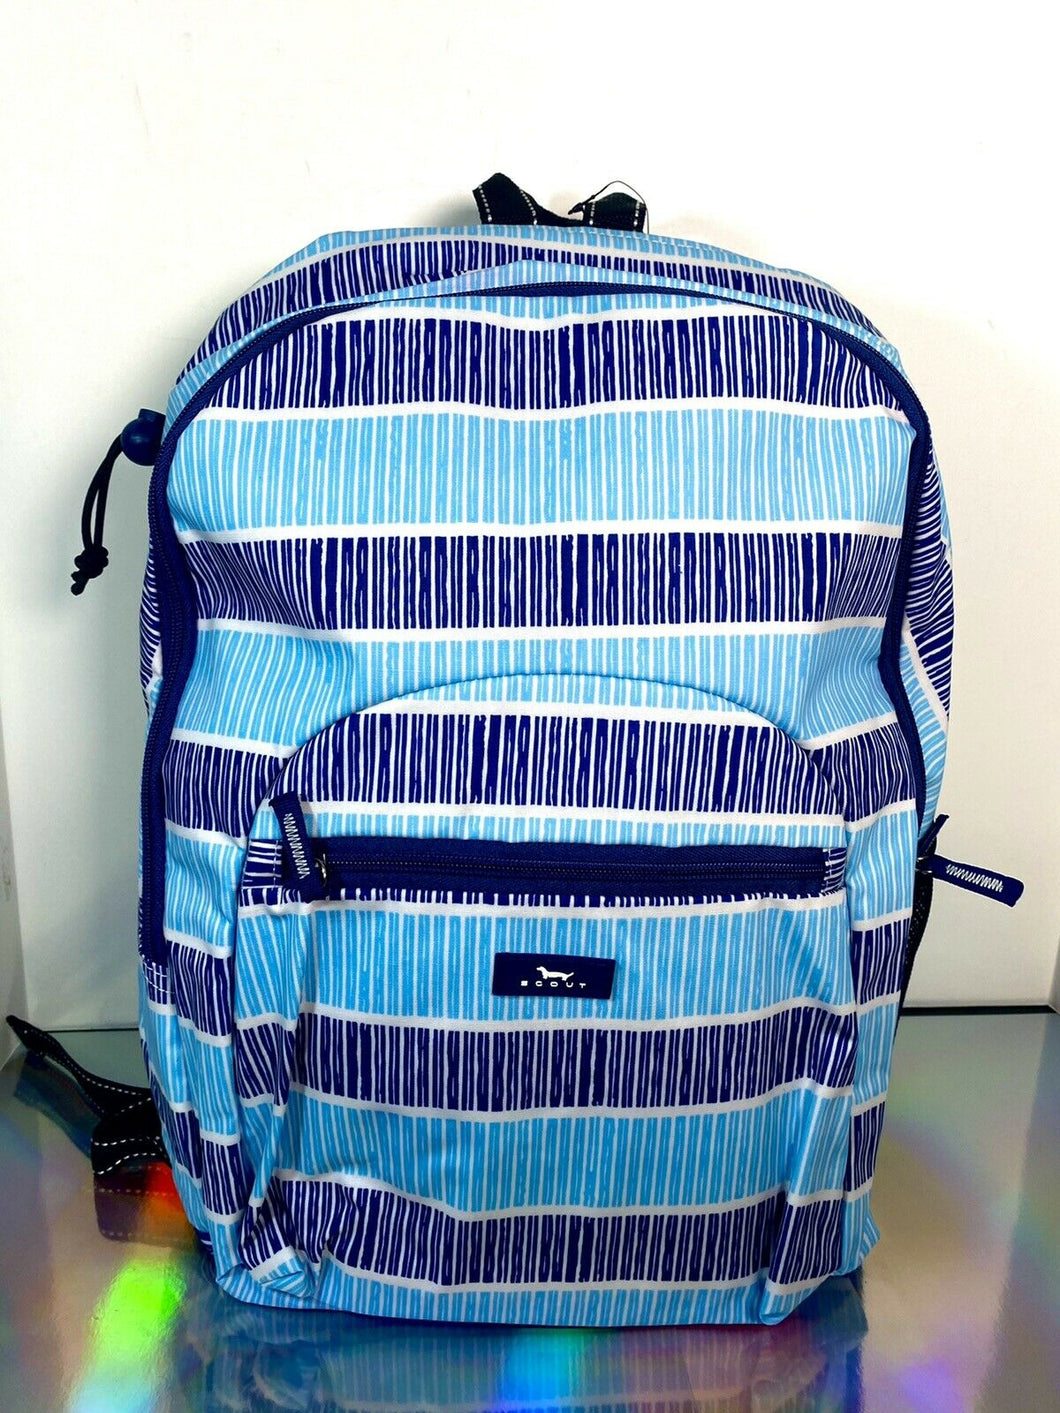 SCOUT Big Draw Water-Resistant Backpack - Light-Blue / Marine Blue Stripes